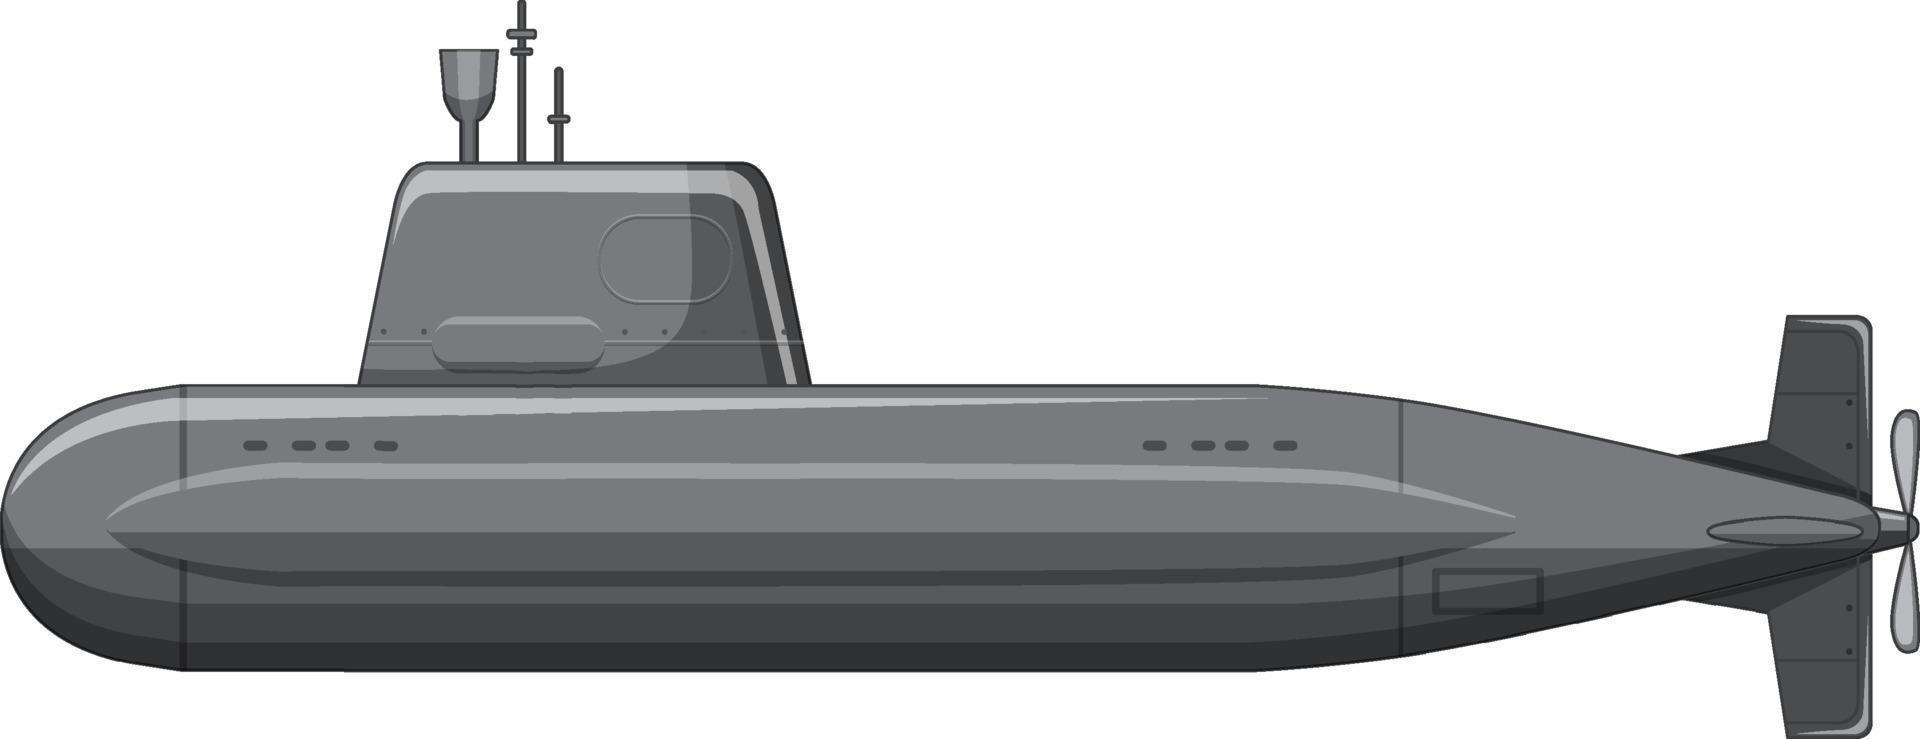 A military submarine on white background vector